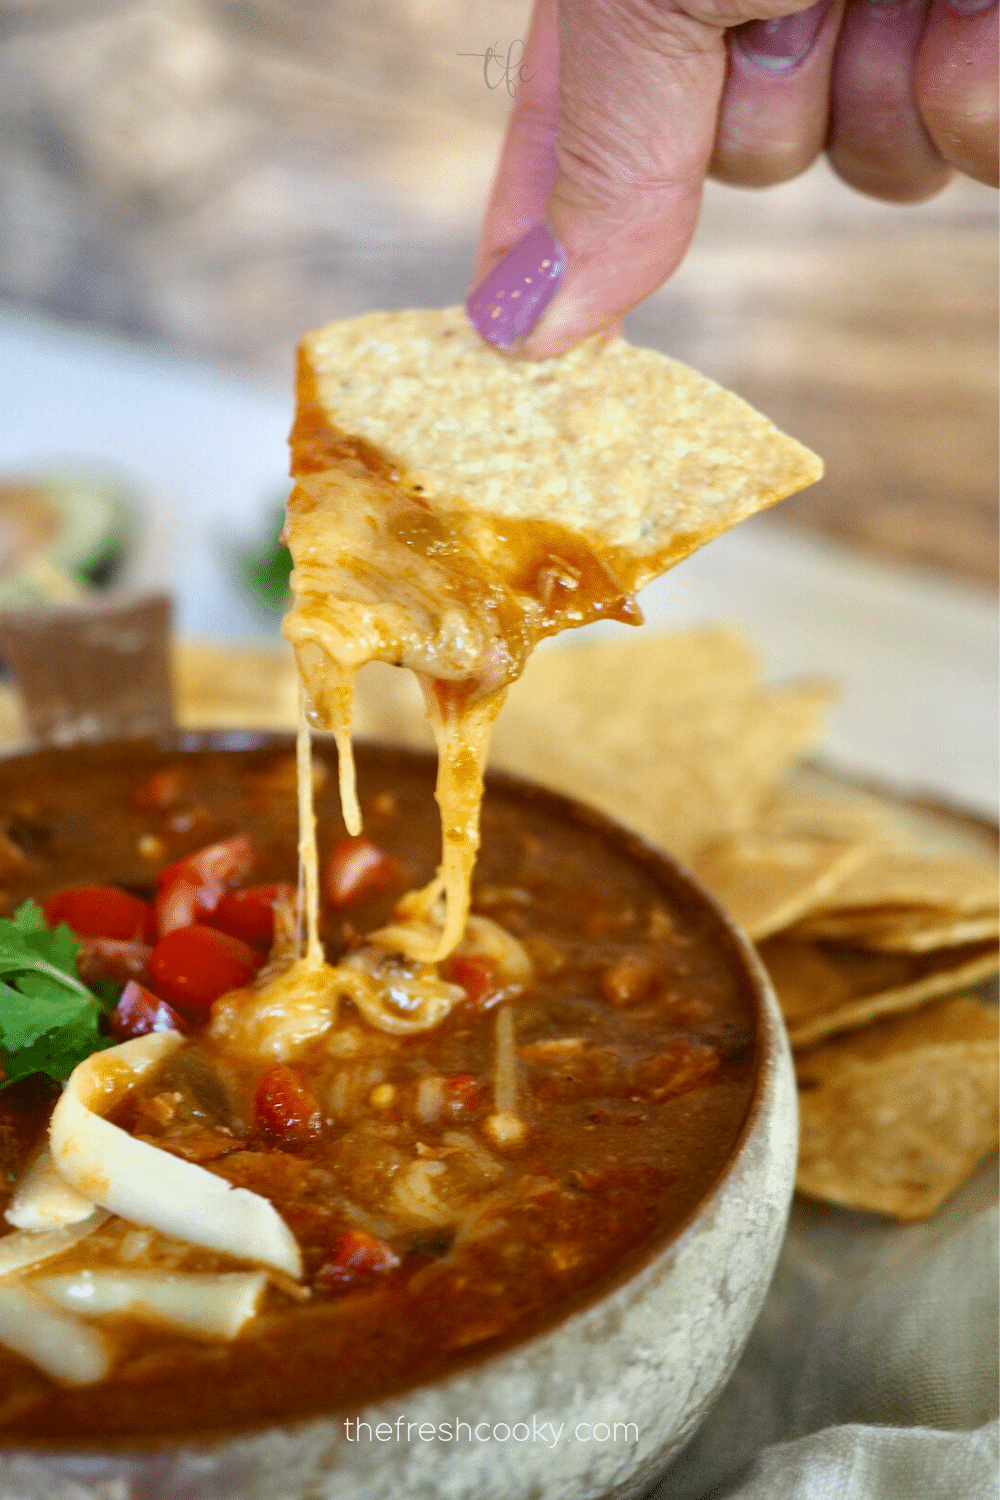 Green Chile recipe with hand dipping tortilla chip into cheesy chili dip.